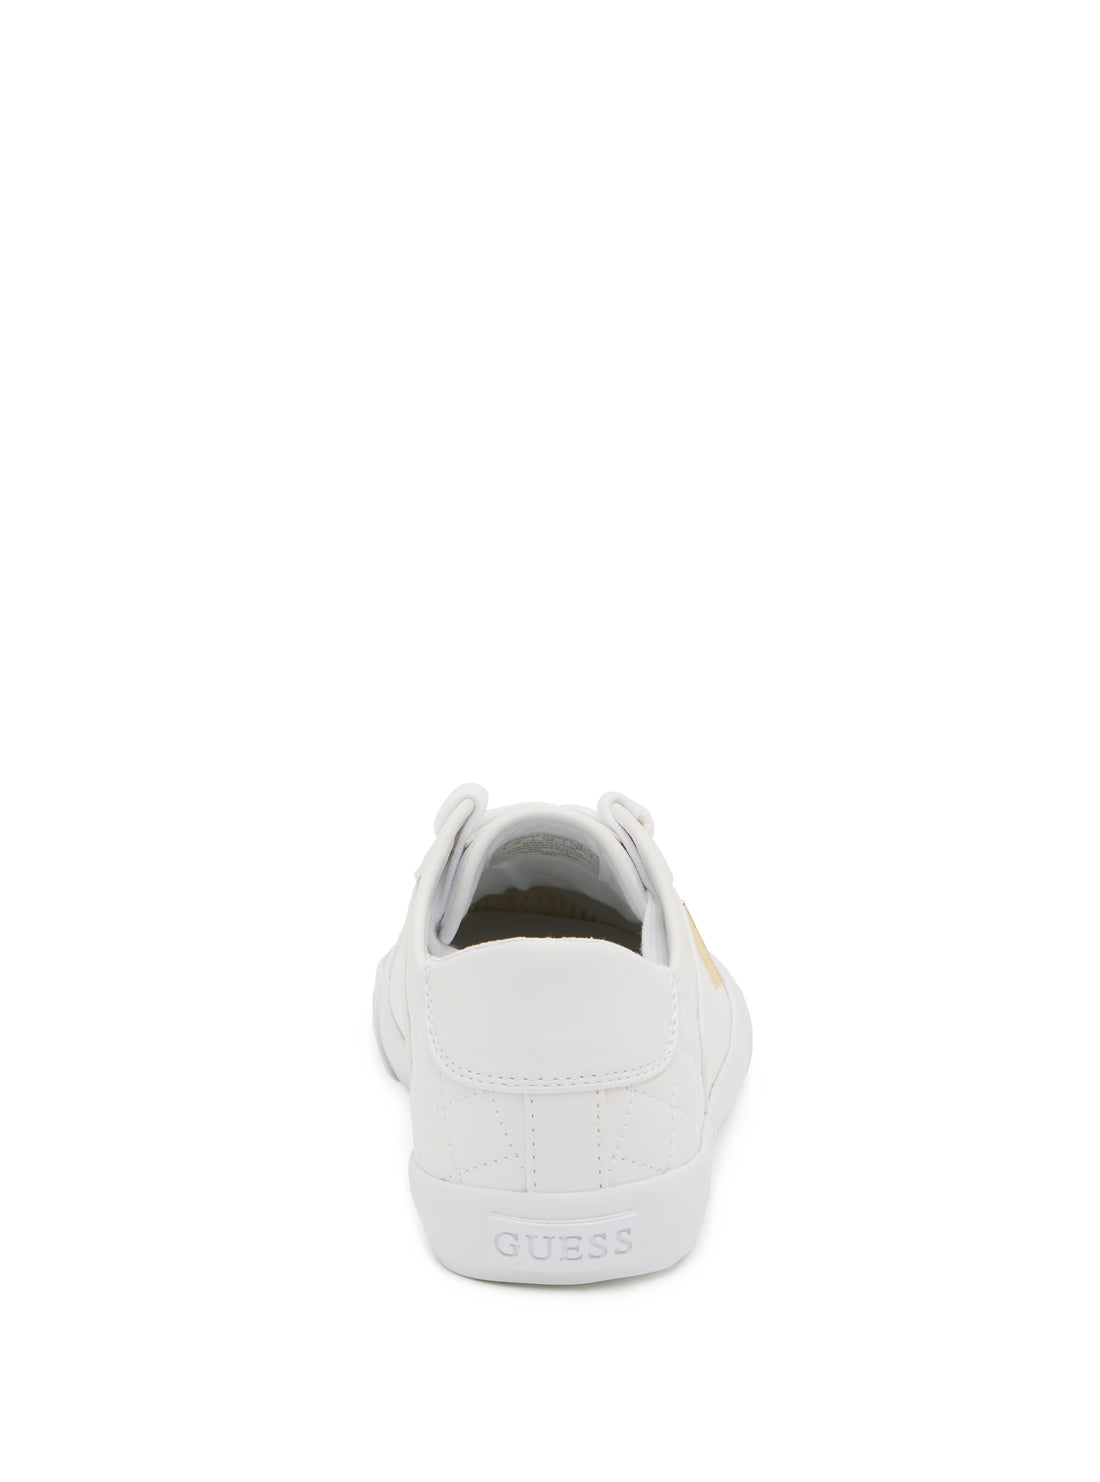 GUESS Women's White Comly Low Top Sneakers COMLY2-A Back View